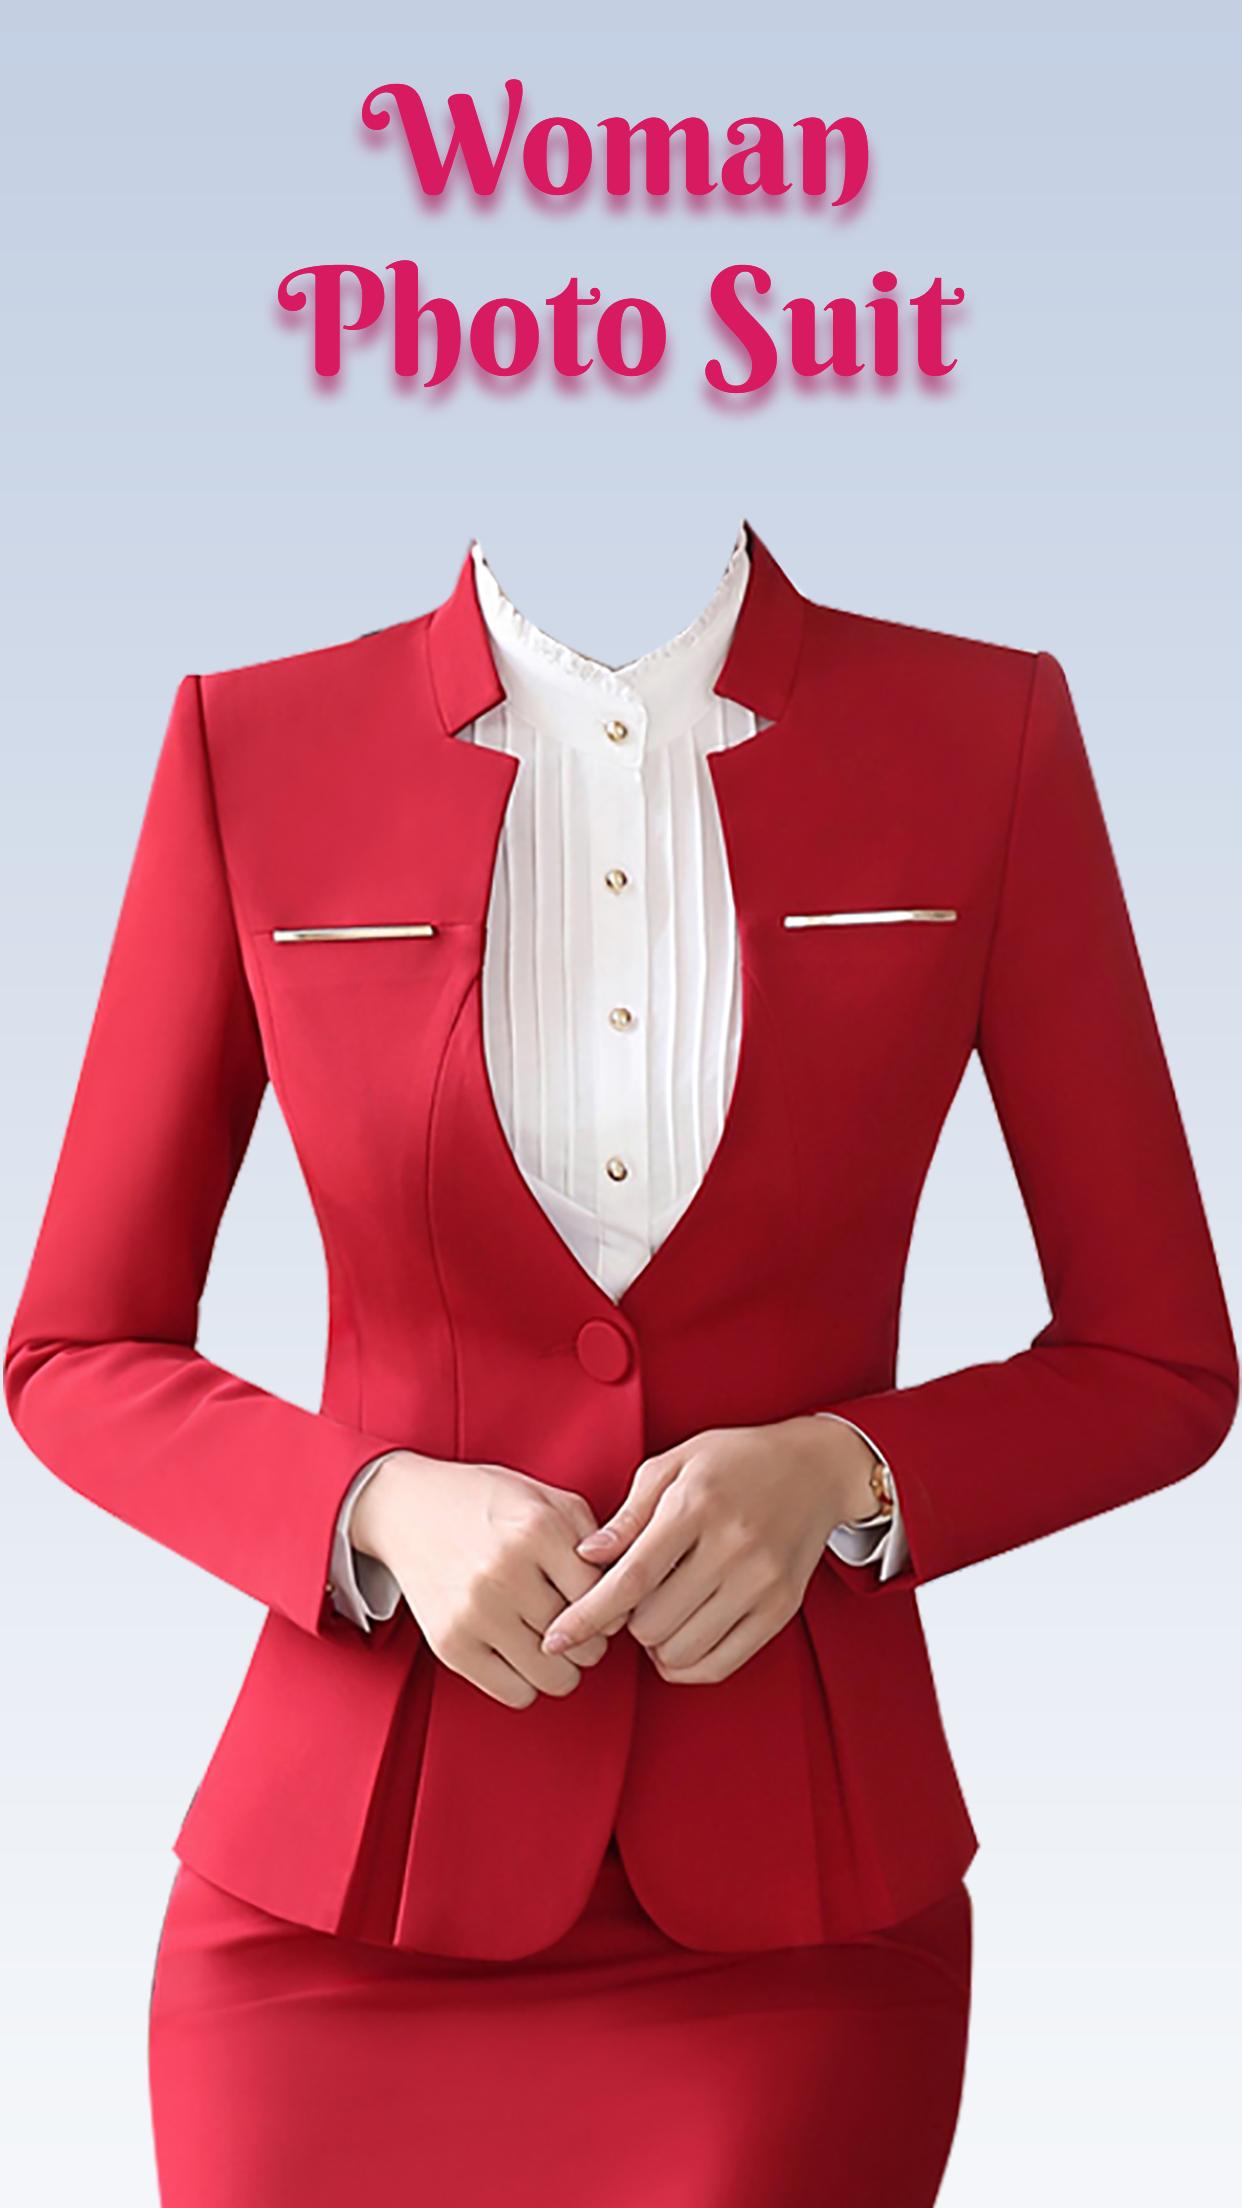 Women Fashion Suit Photo Editor for Android - APK Download